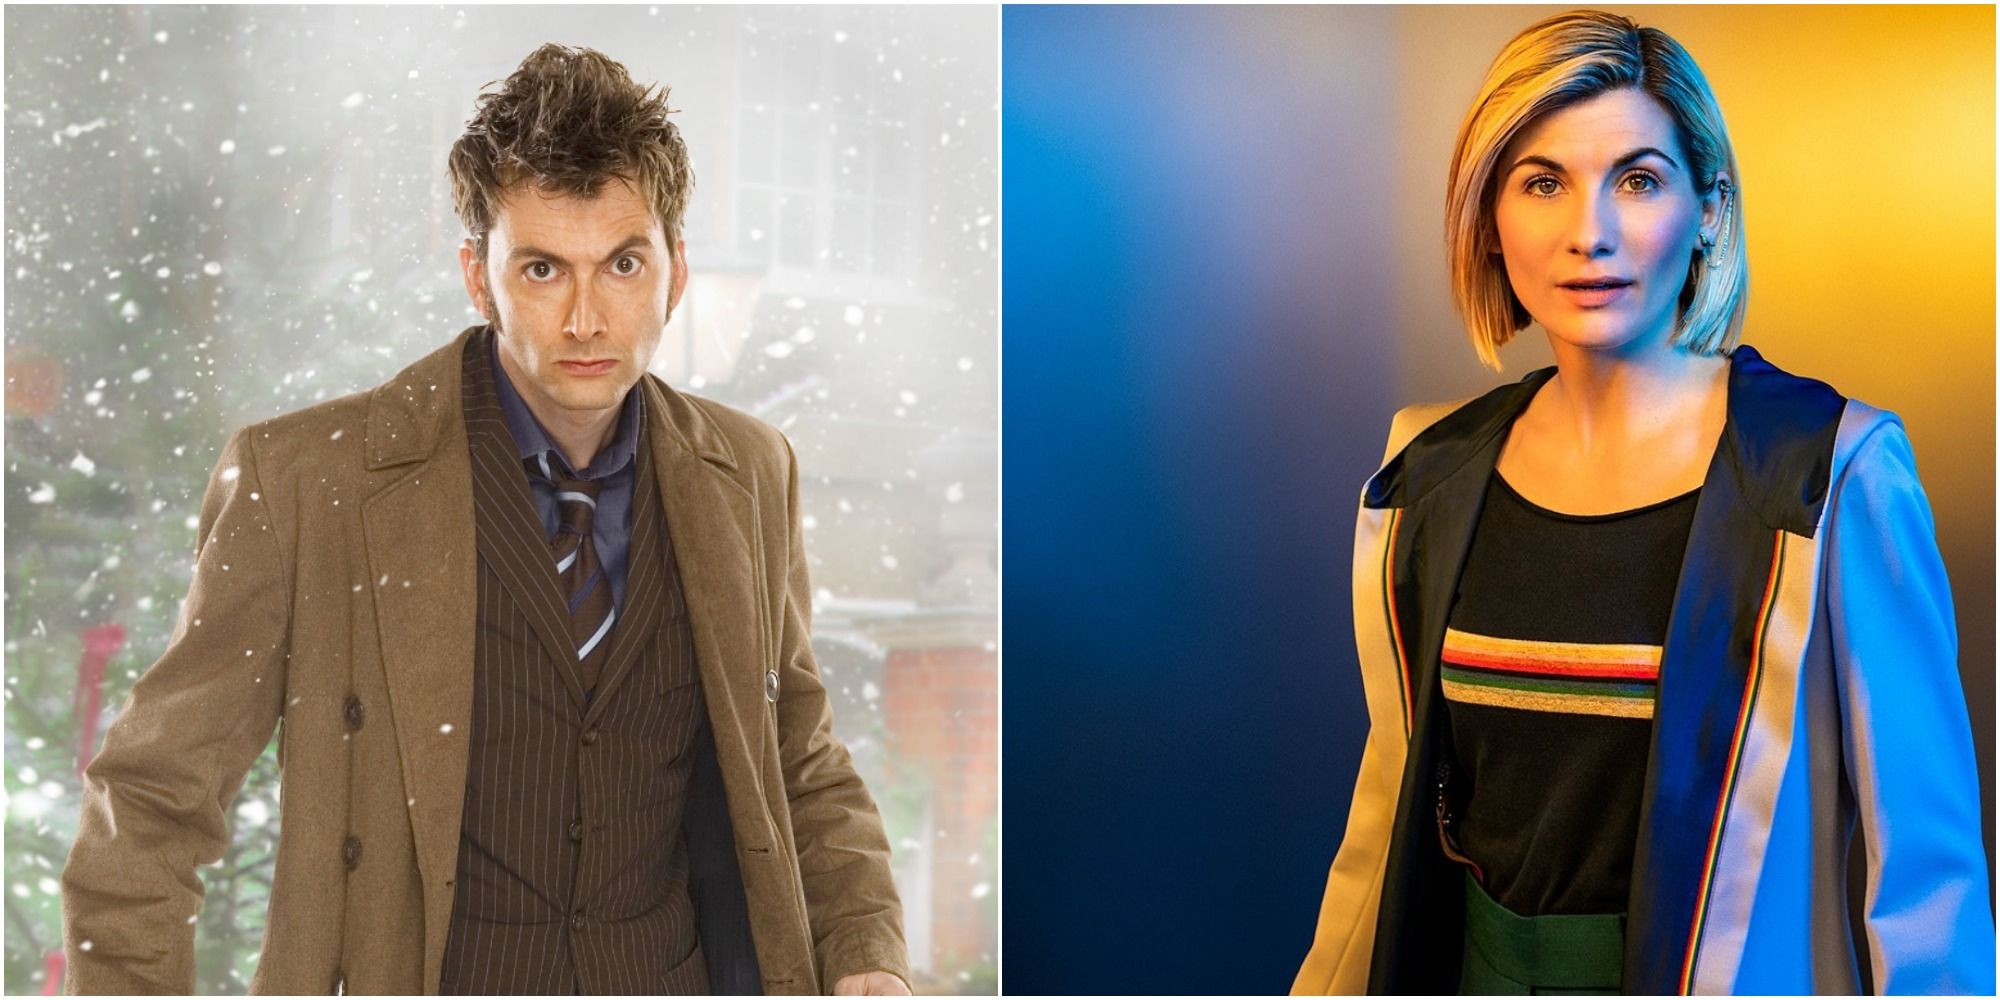 10th Doctor standing in snow / 13th Doctor smiling